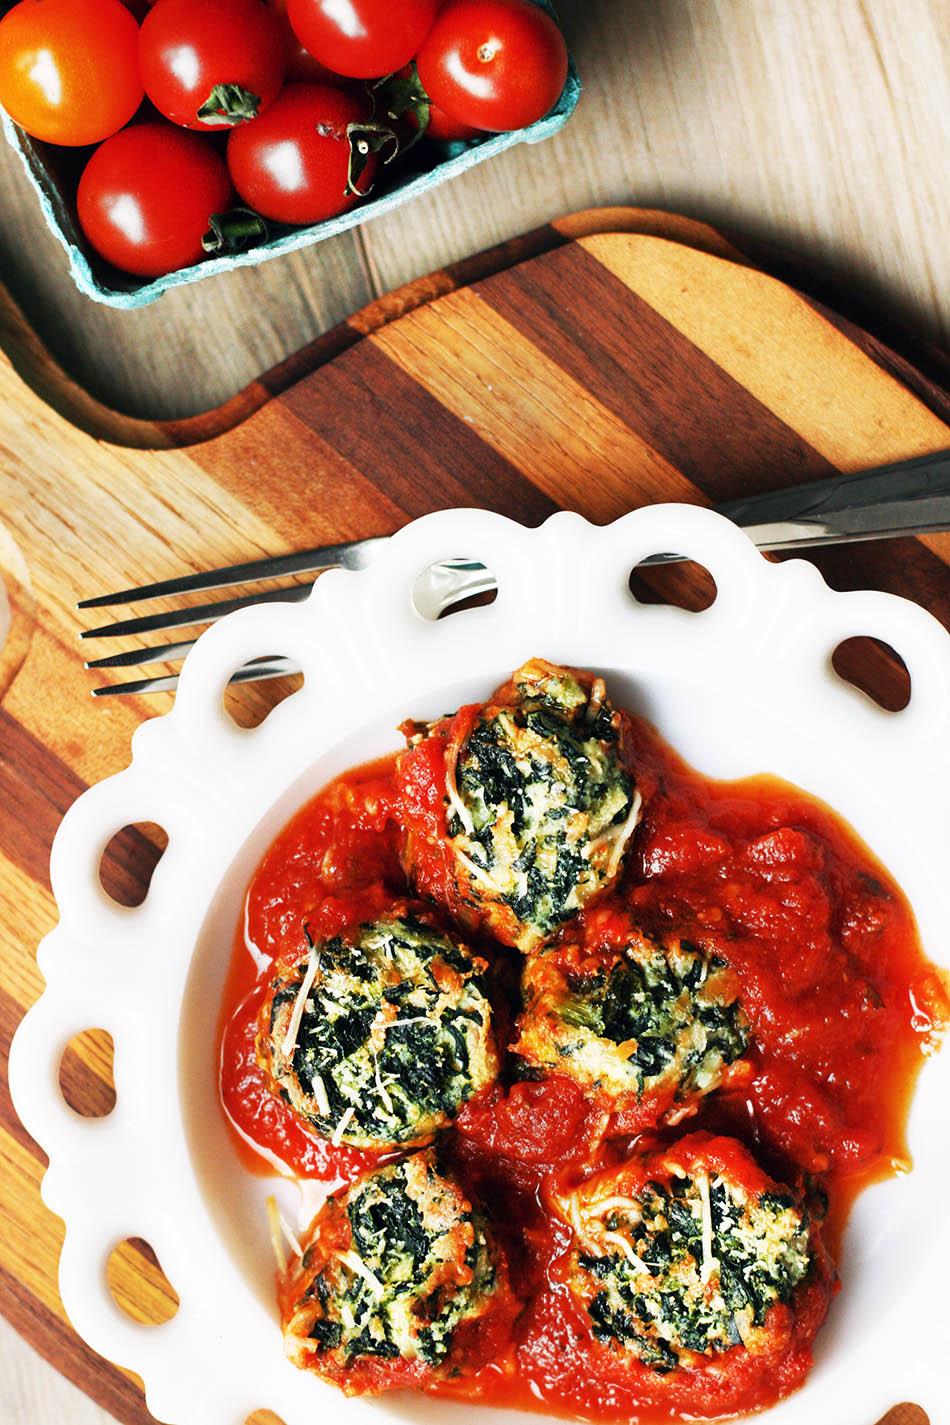 Vegetarian spinach ricotta meatballs: Topped with marinara sauce. Click through for recipe!